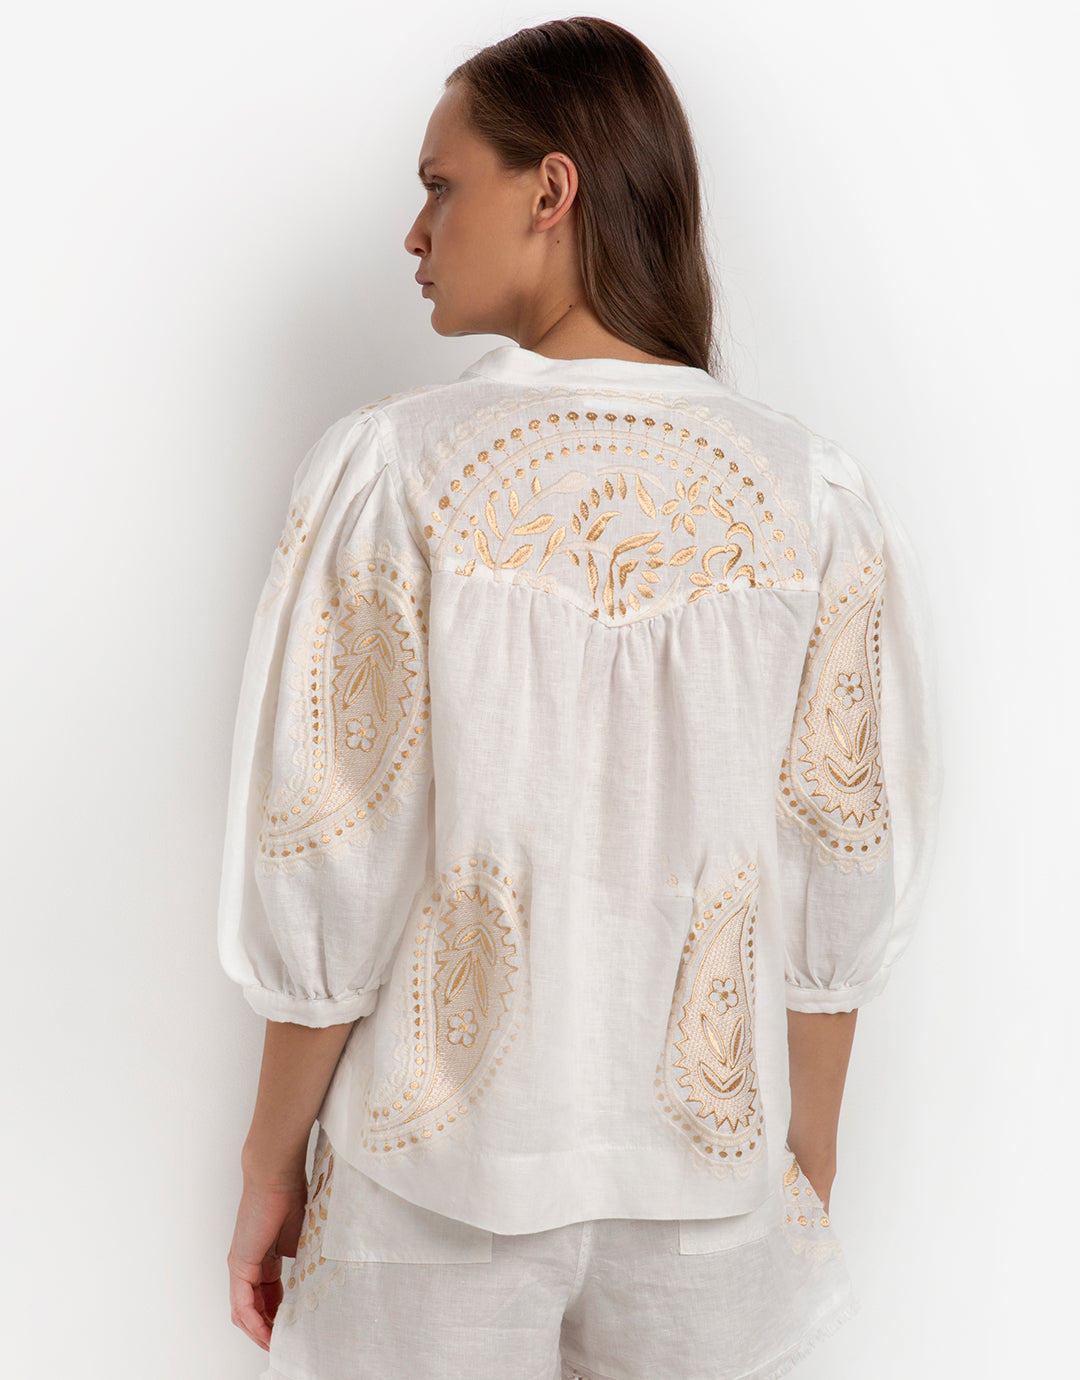 Paisley Long Sleeve Blouse - White and Gold - Simply Beach UK